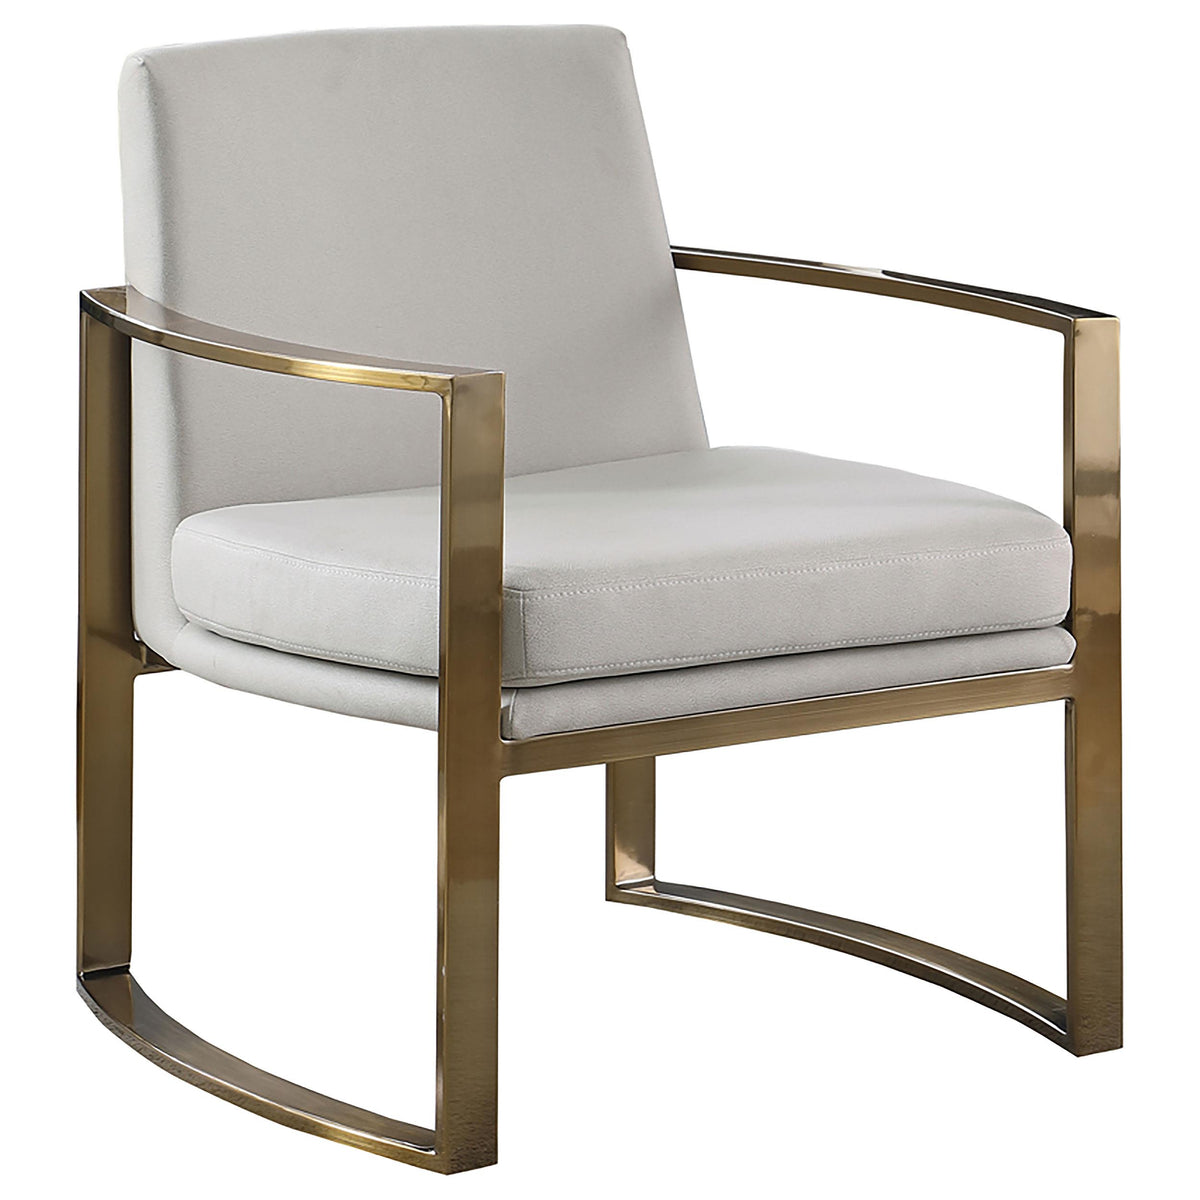 Cory Concave Metal Arm Accent Chair Cream and Bronze  Las Vegas Furniture Stores